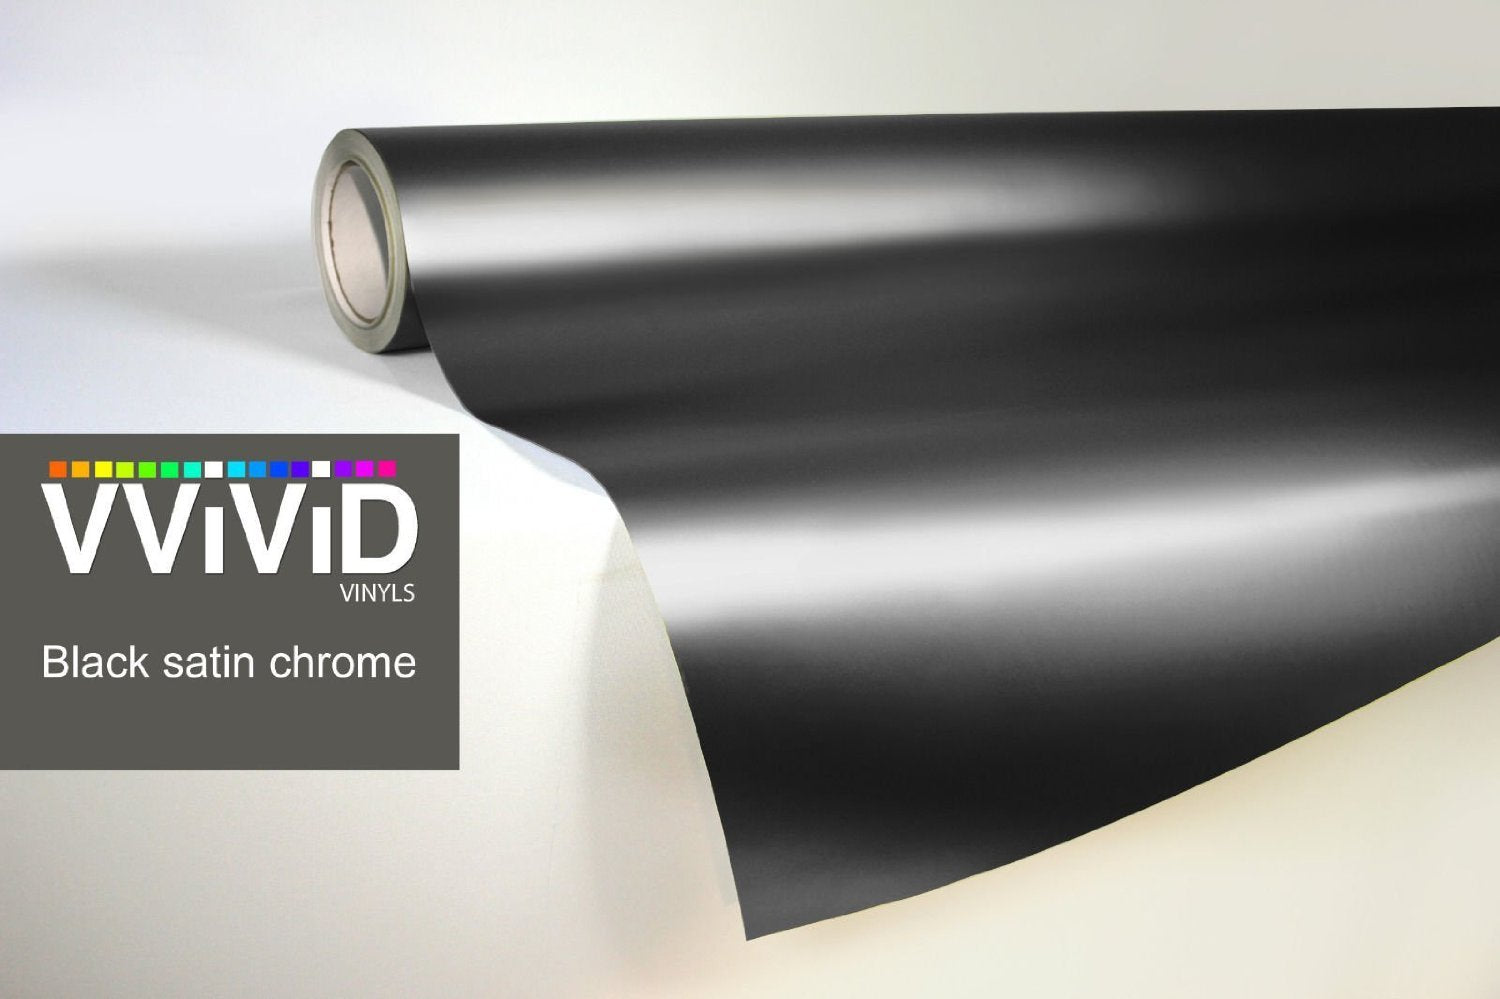 Black Satin Chrome Conformable Stretch Vinyl Wrap Roll with VViViD XPO Air Release Technology - 6ft x 5ft